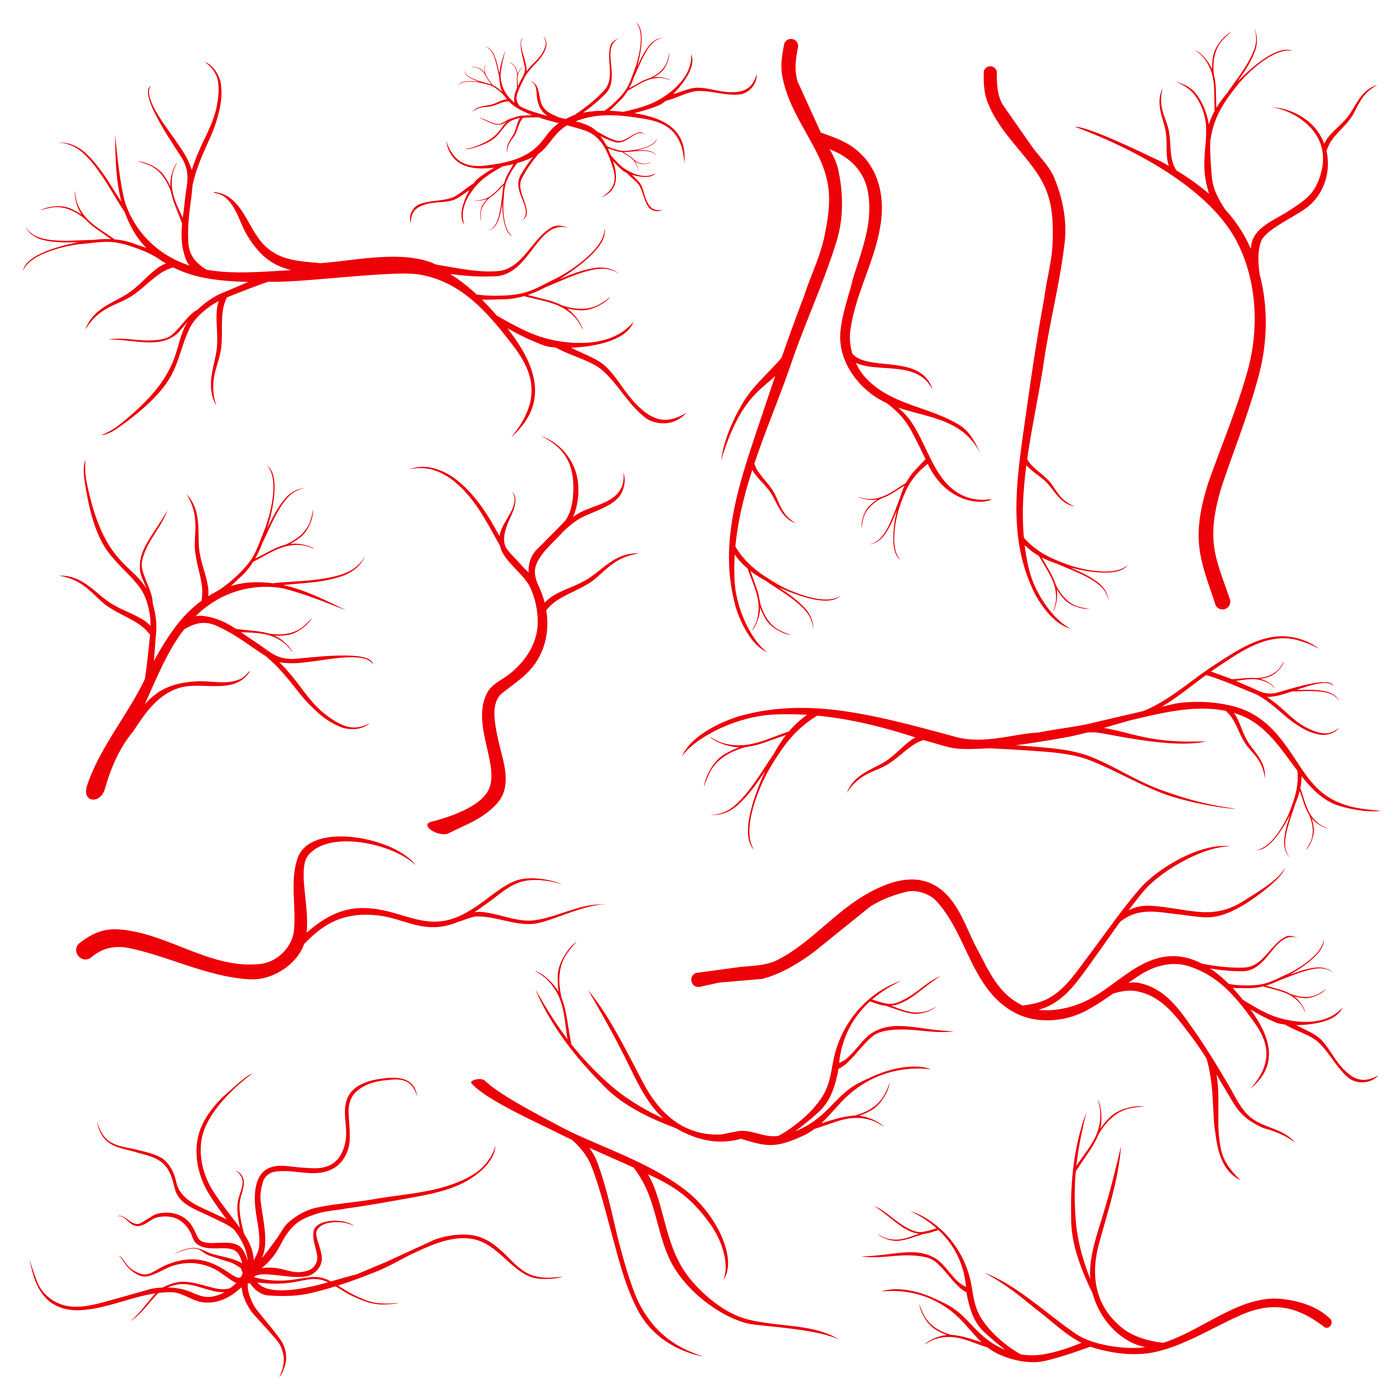 Human eye veins, vessel, blood arteries isolated on white vector set By